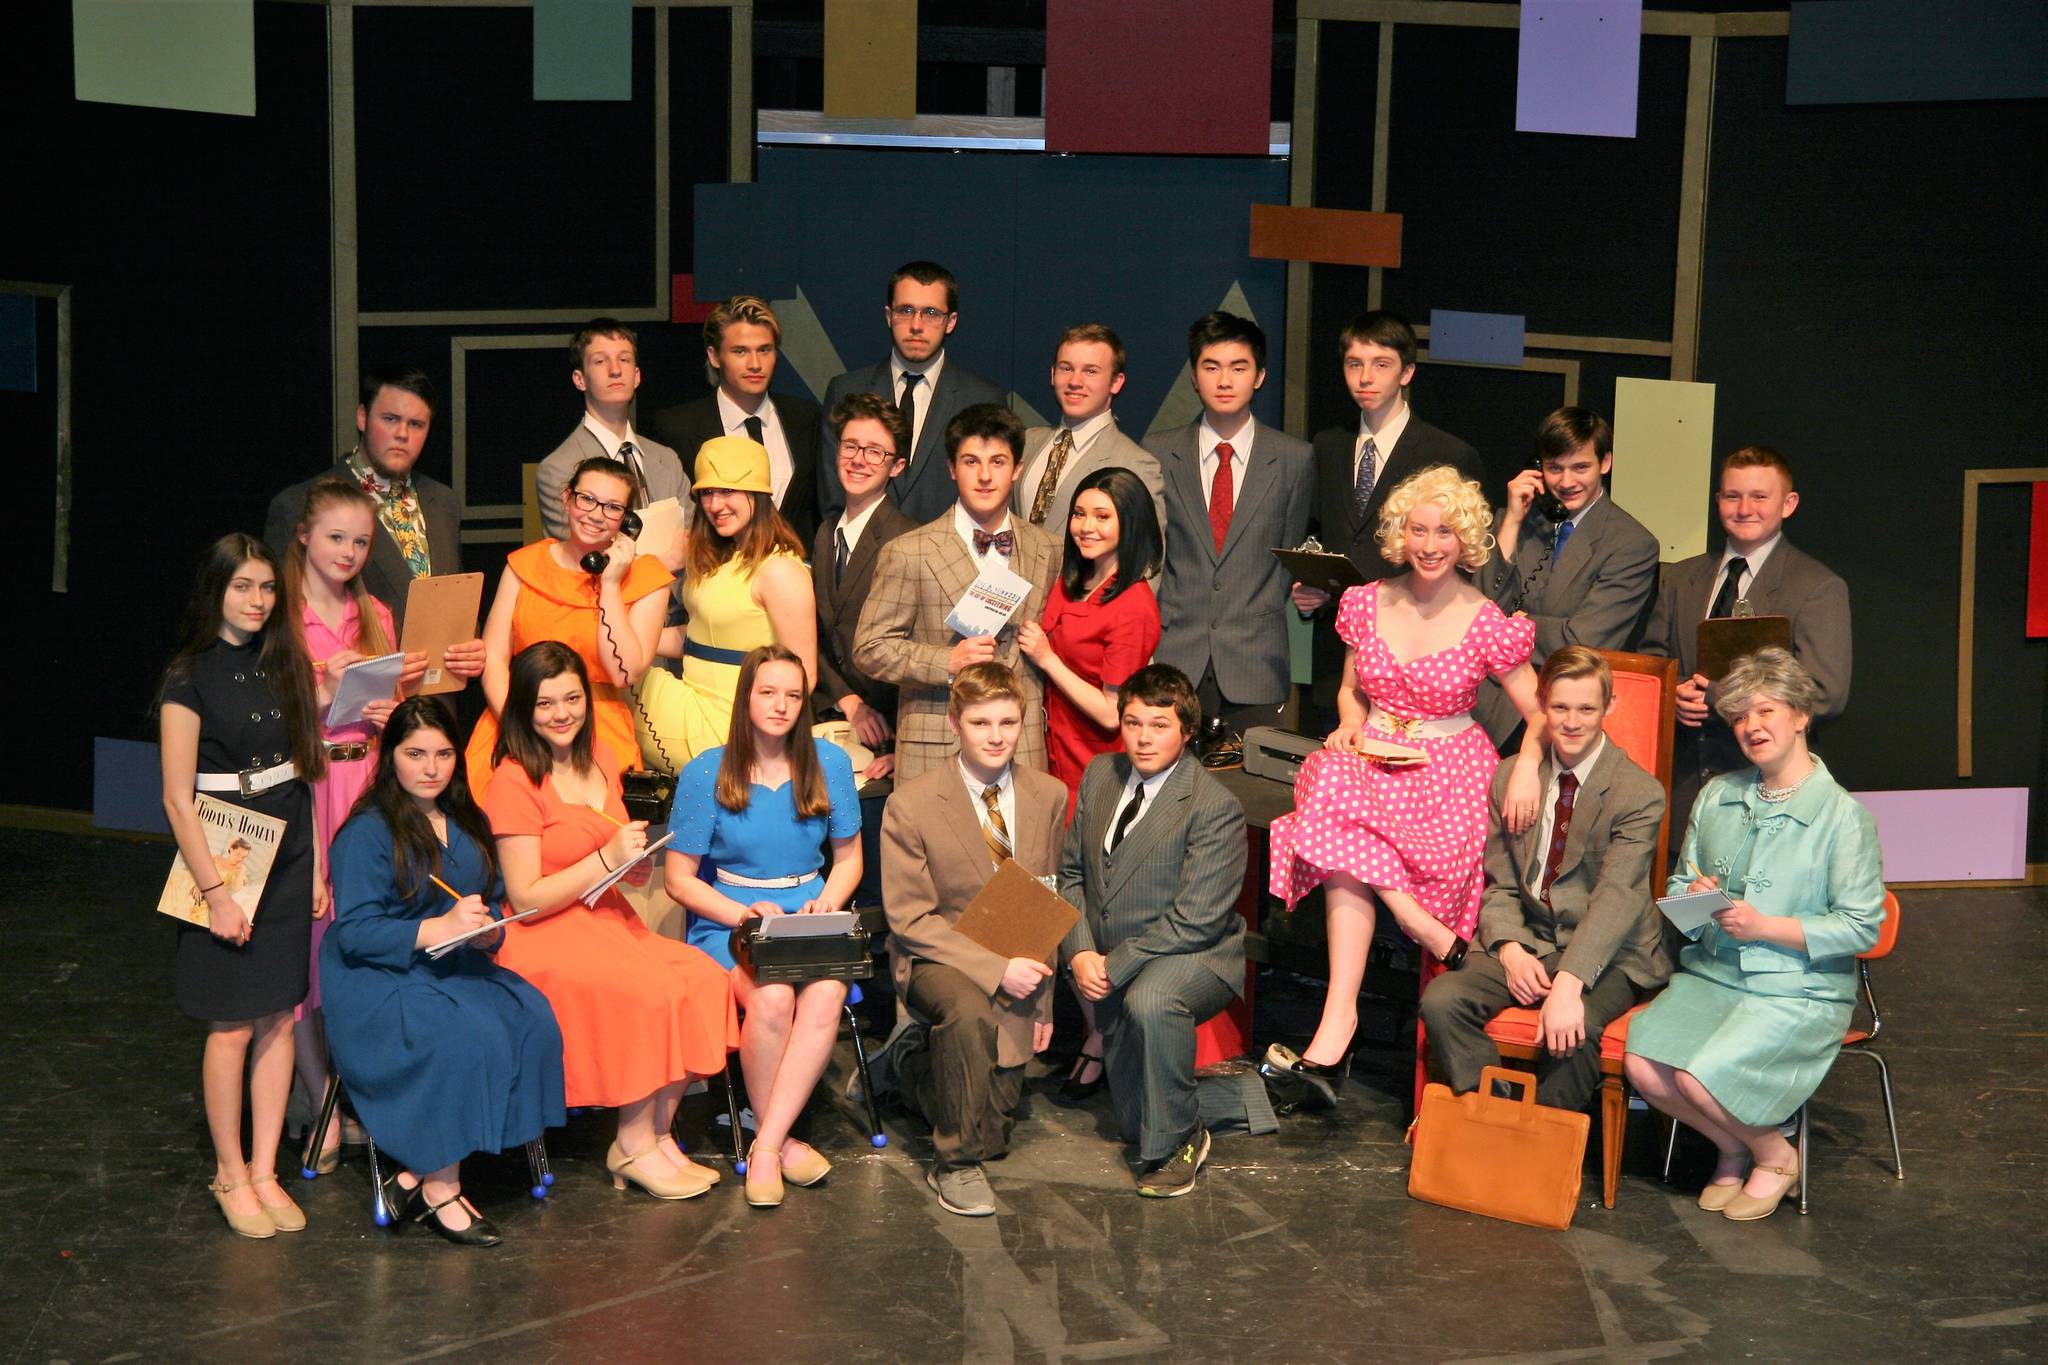 Sequim High School’s “How To Succeed In Business Without Really Trying” runs for three weekends starting May 4. Photo courtesy Megan Hughes